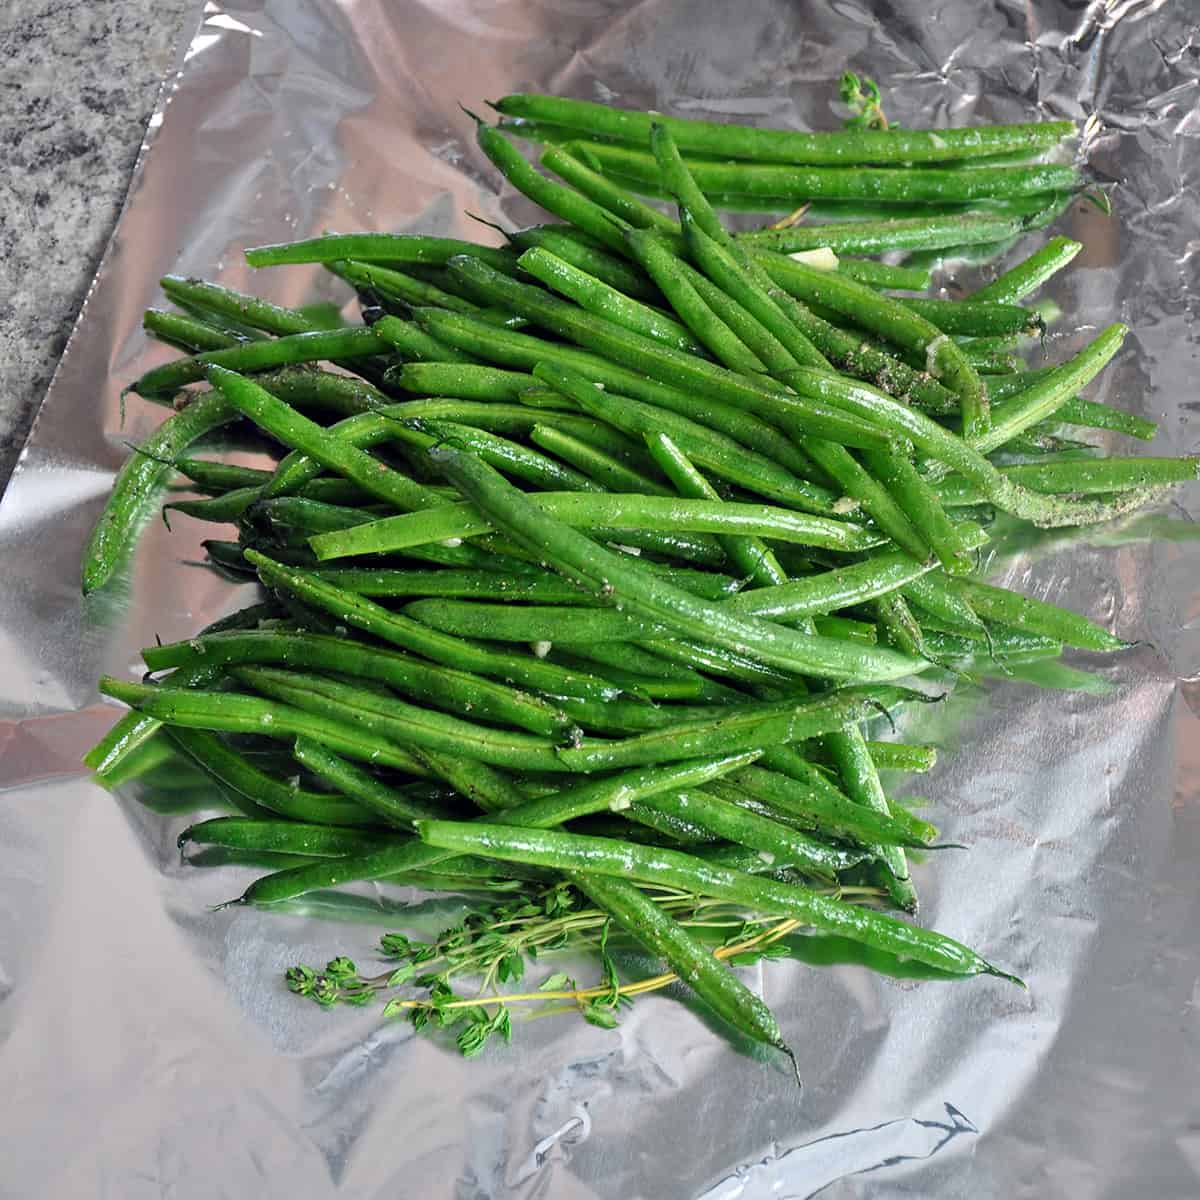 Green beans and fresh thyme sprigs on a piece of tinfoil.